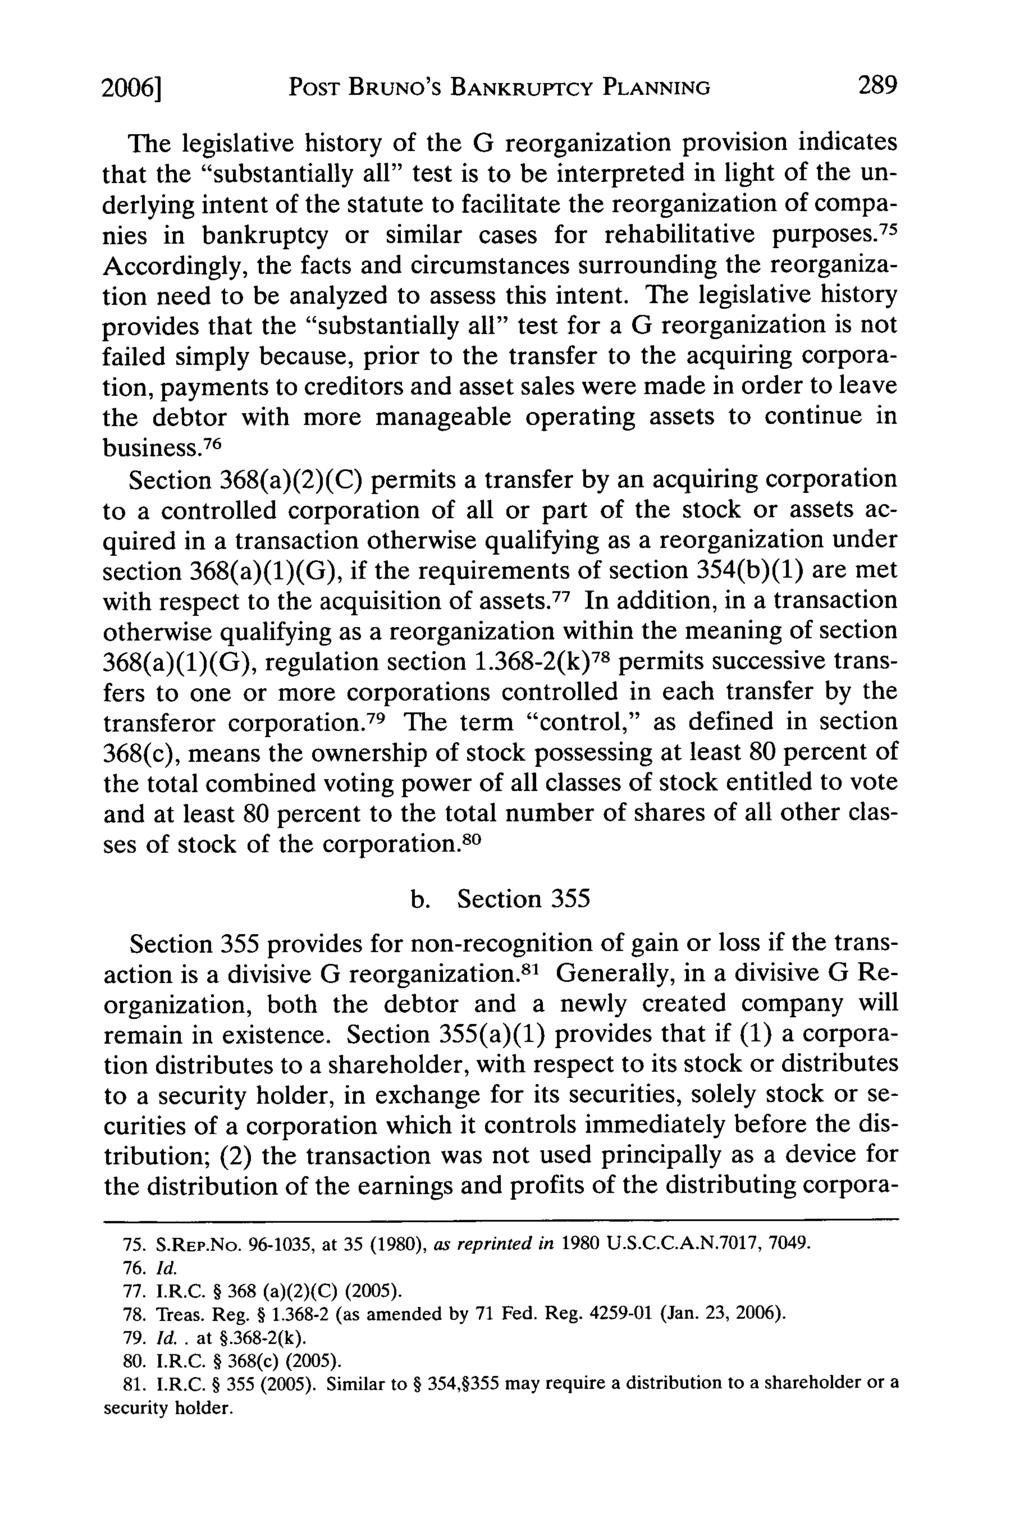 2006] POST BRUNO'S BANKRUPTCY PLANNING The legislative history of the G reorganization provision indicates that the "substantially all" test is to be interpreted in light of the underlying intent of